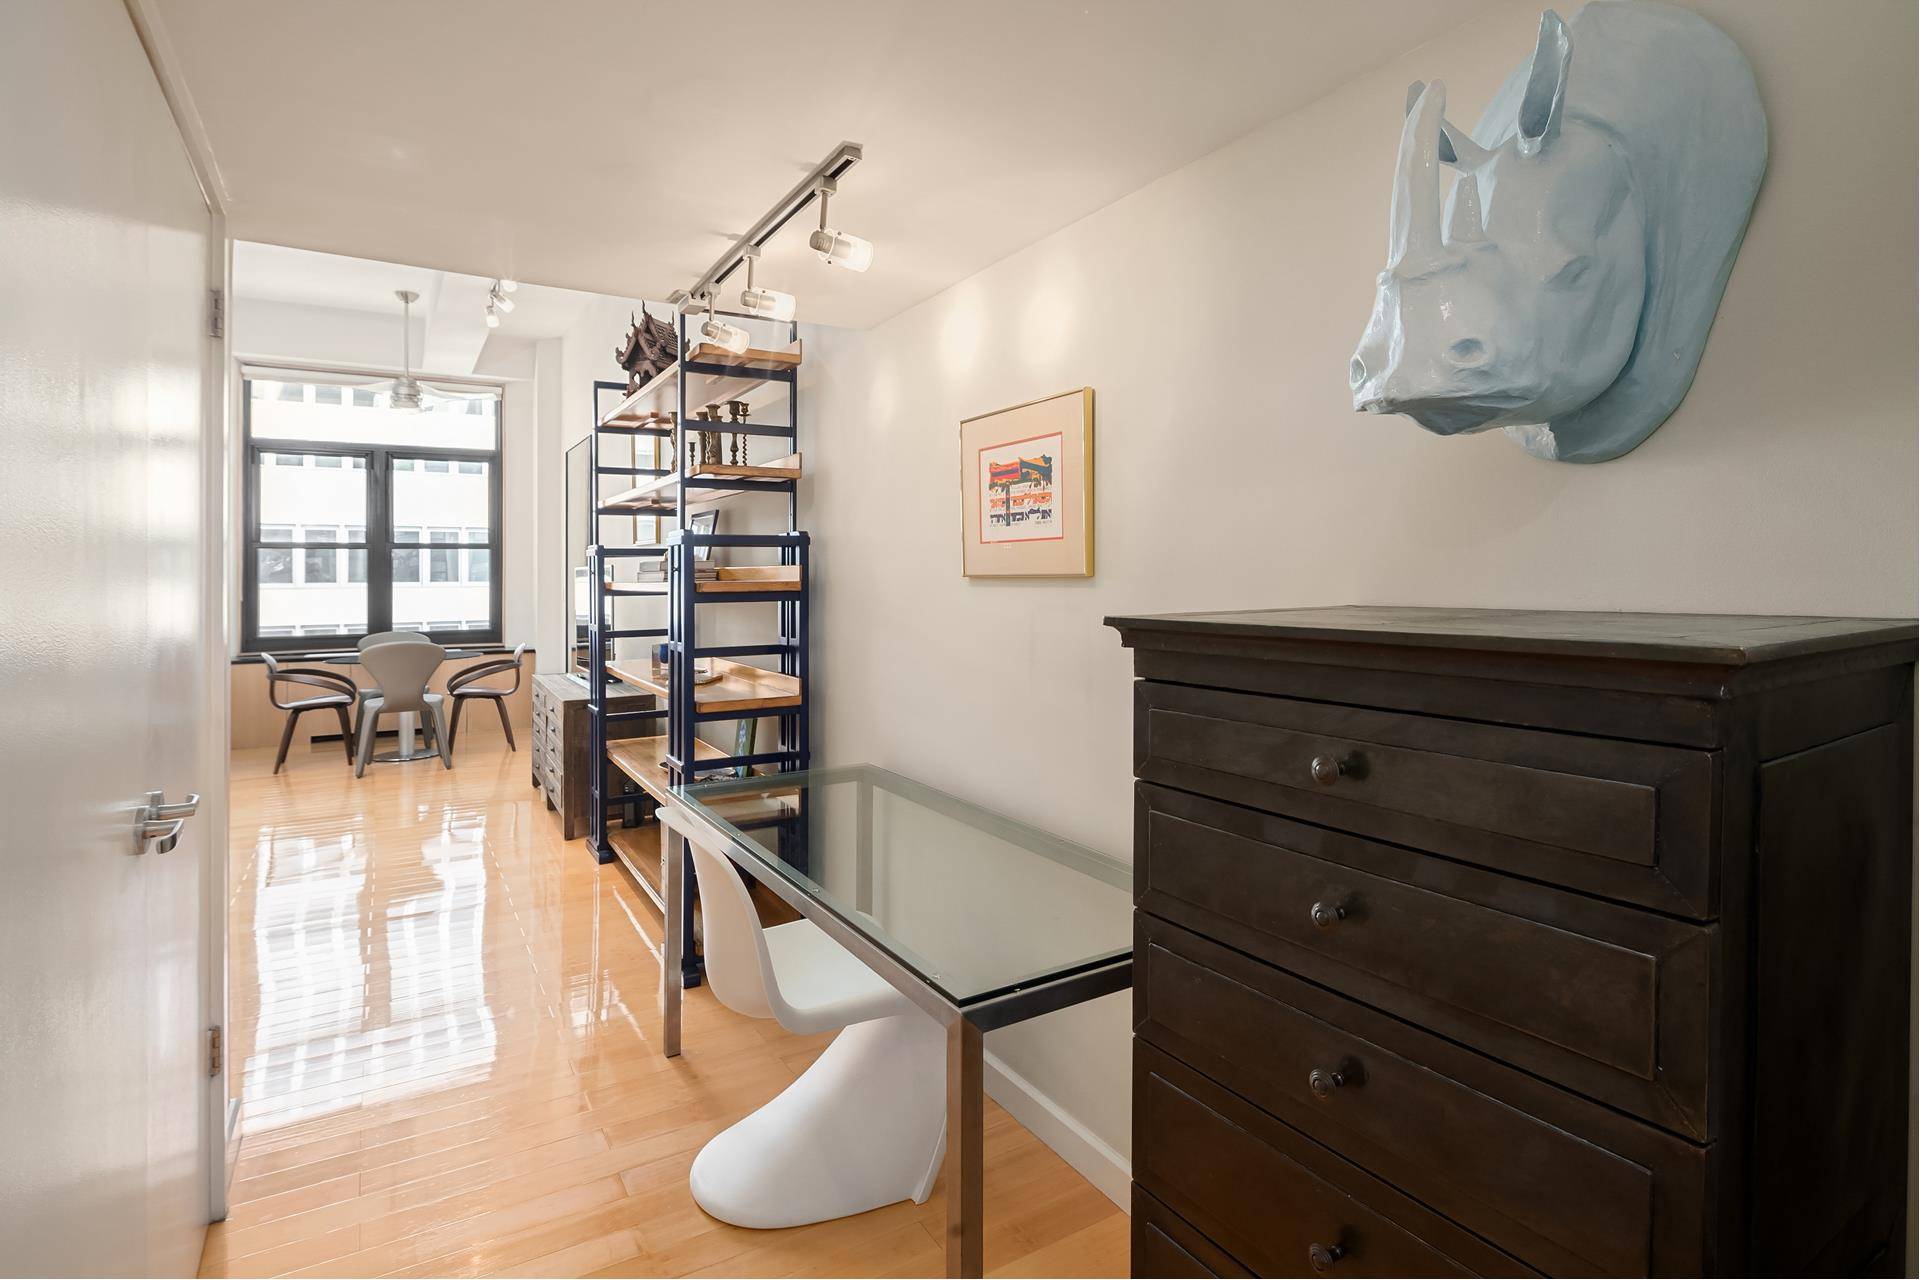 New to market ! This stunning studio features dramatic 12 foot ceilings, oversized windows, an abundance of closet space, separate dining area and more.